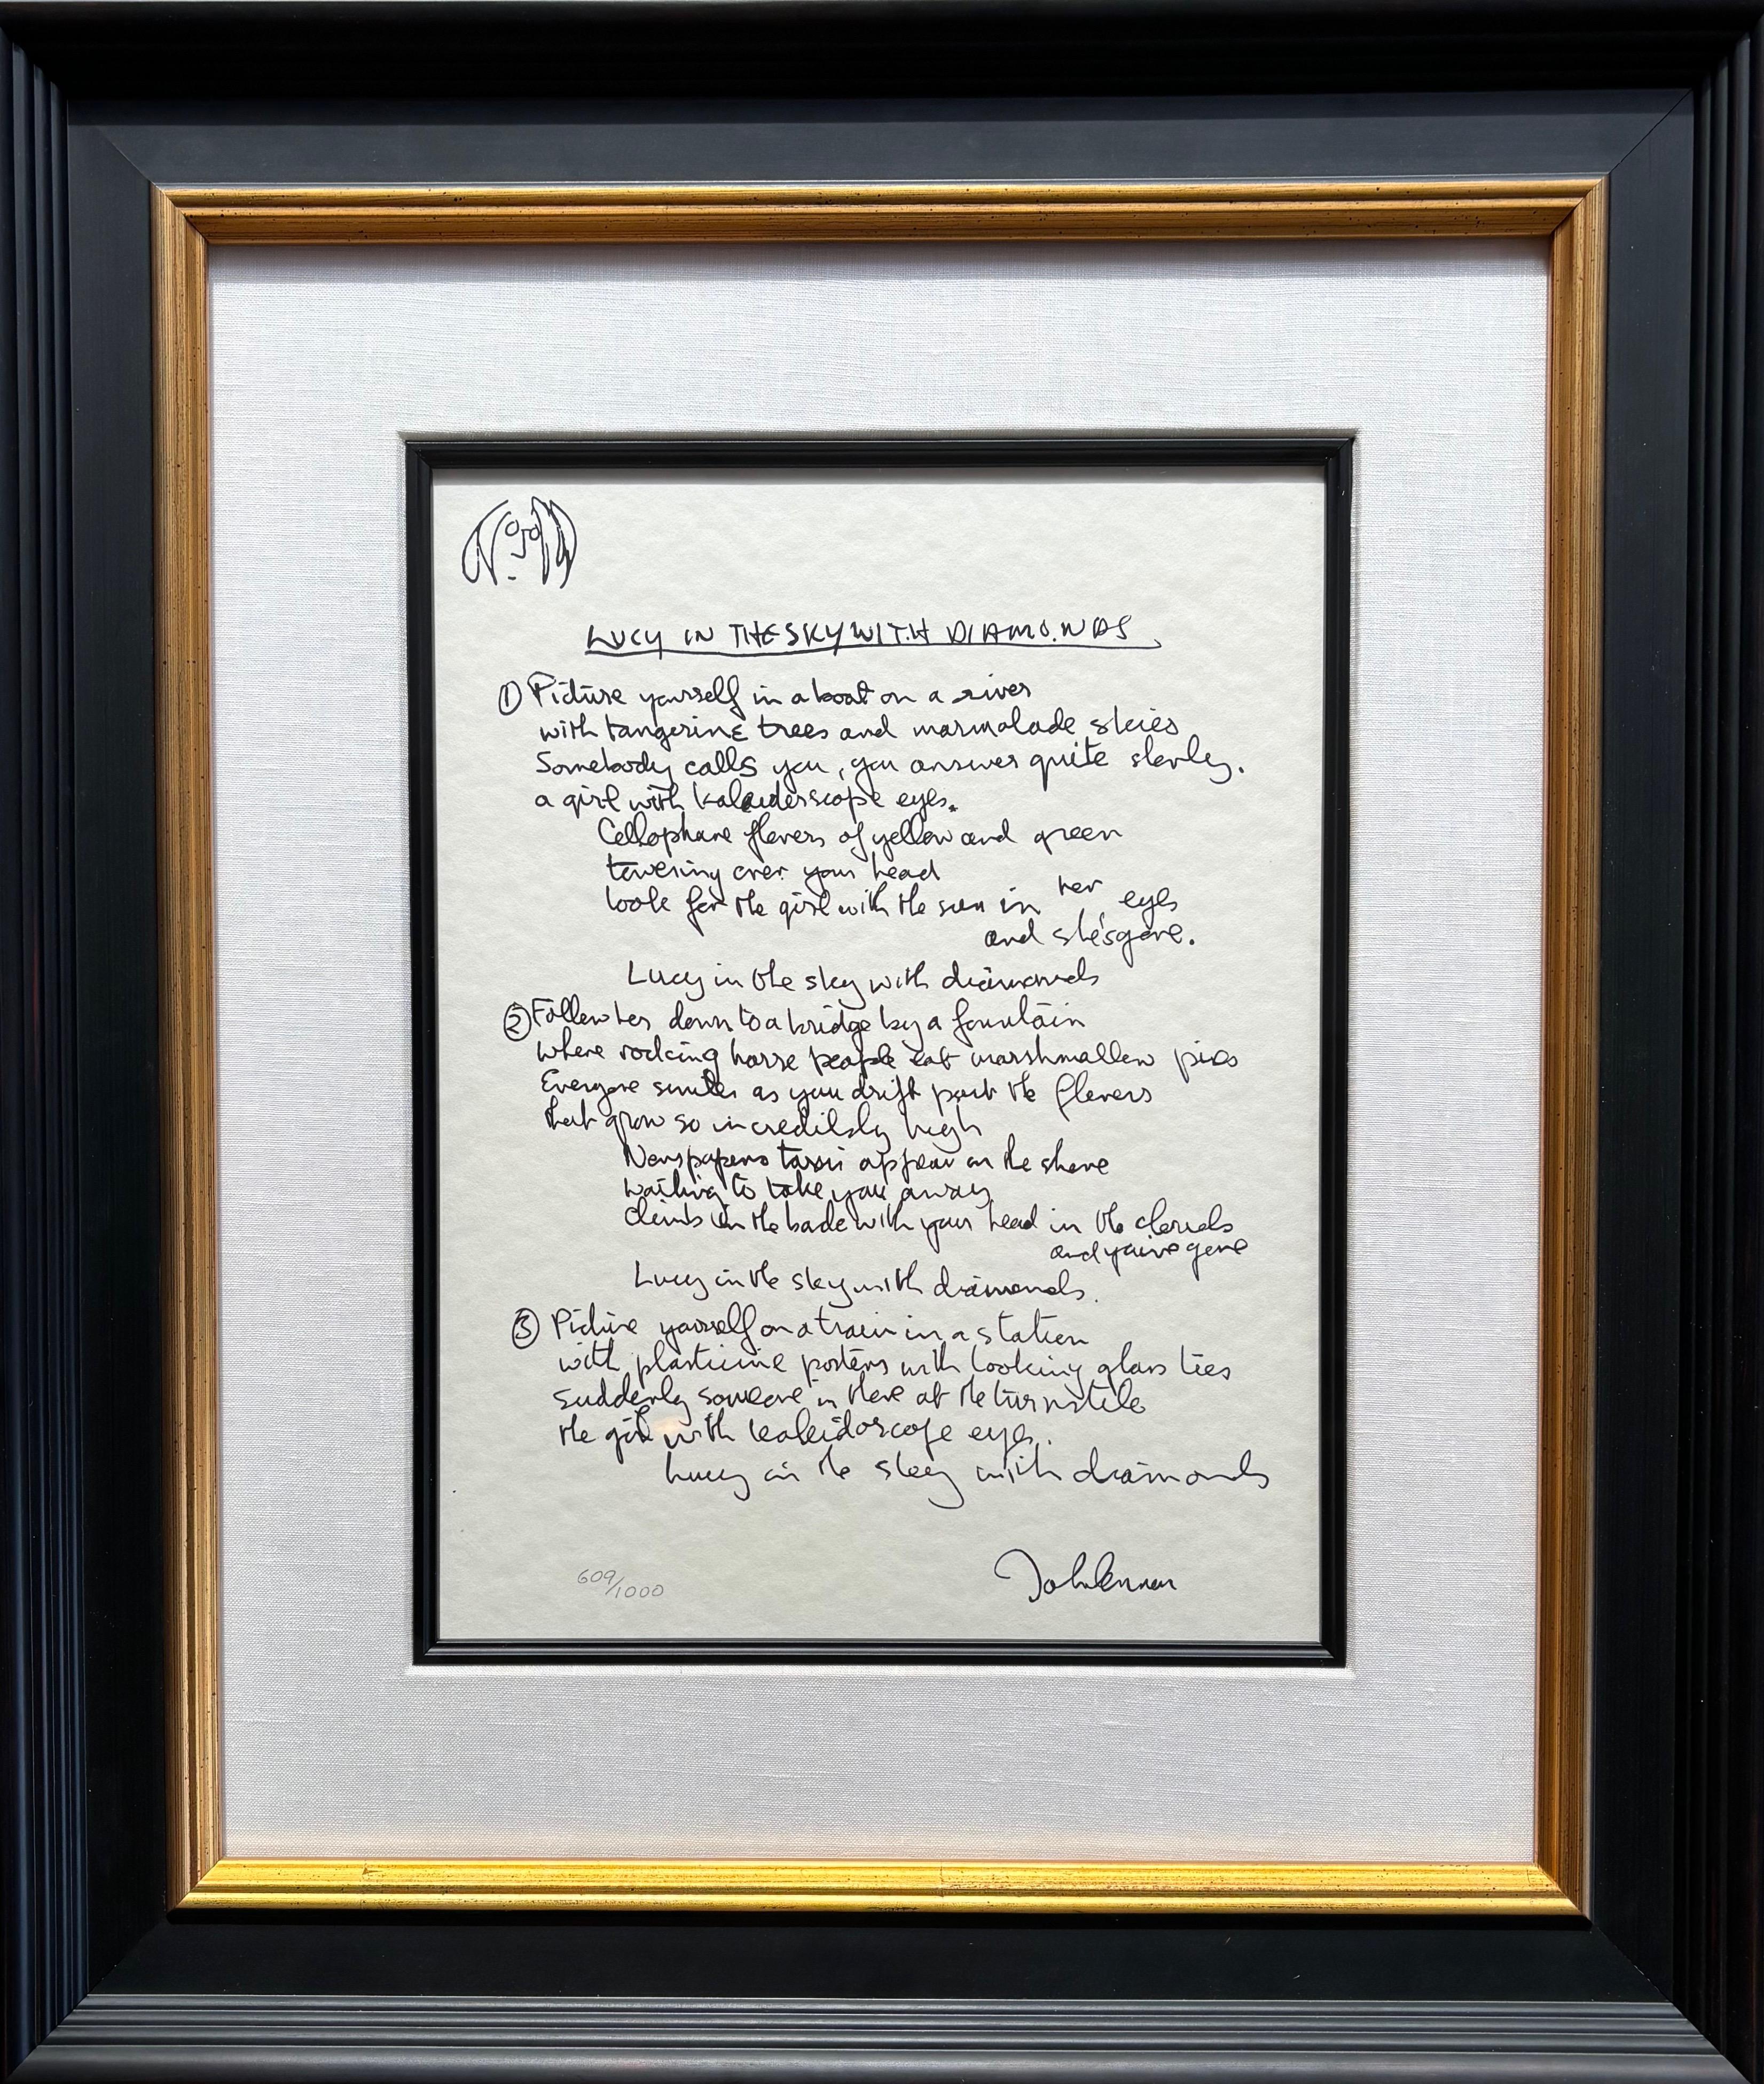 John Lennon Print - "Lucy In The Sky With Diamonds" Limited Edition Hand Written Lyrics